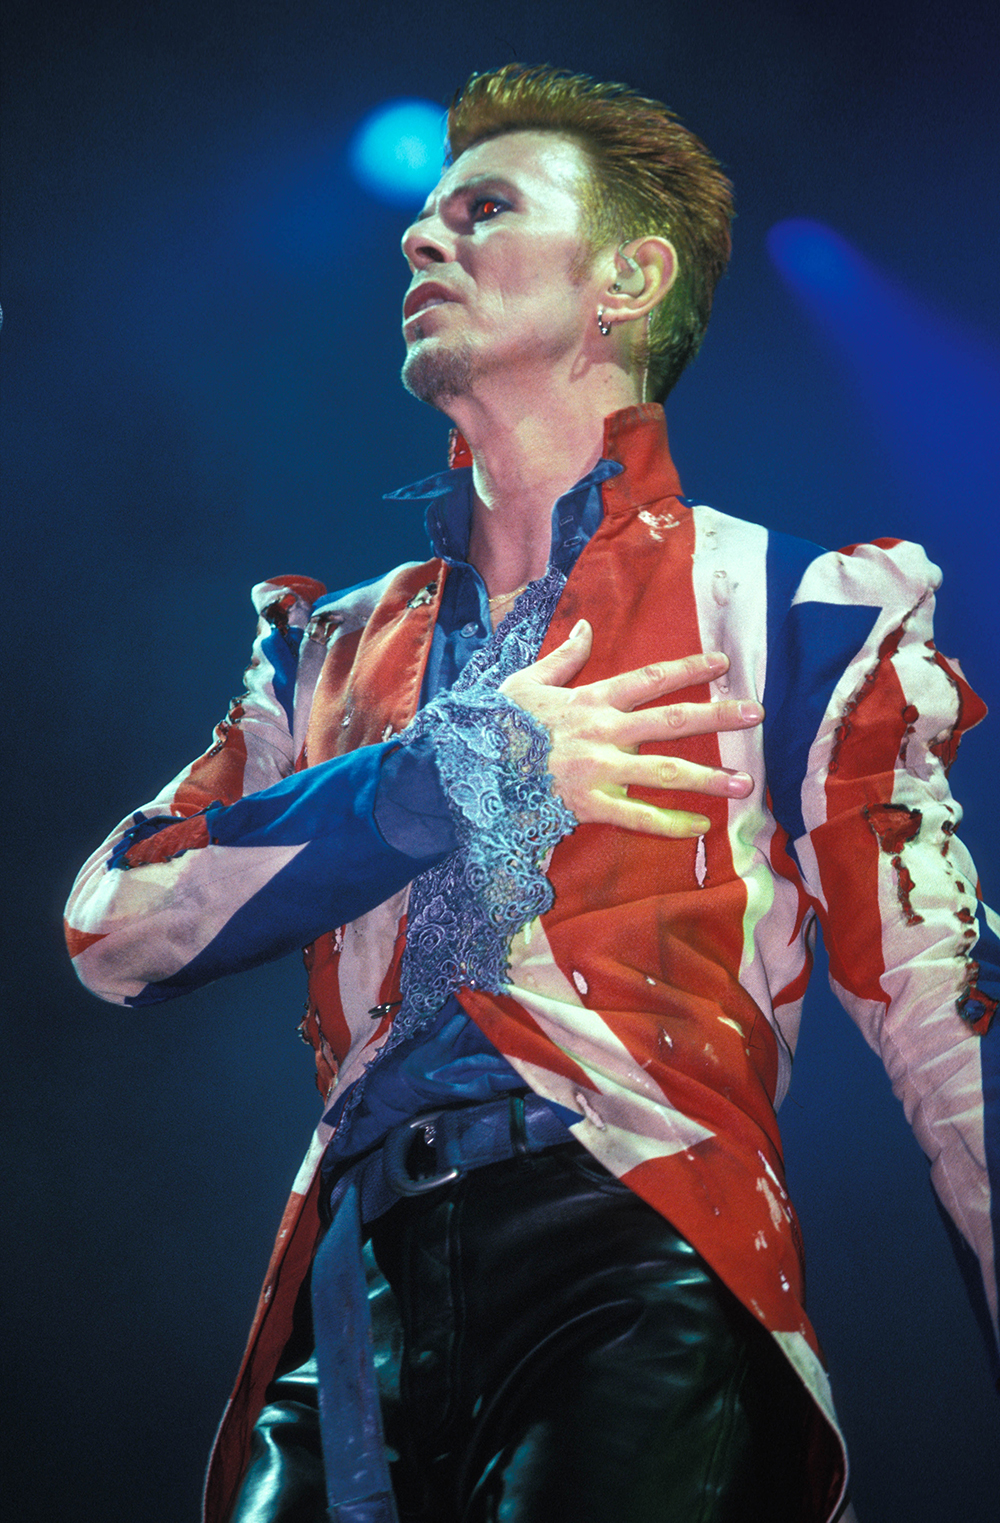 Bowie performing at a UK festival in 1996.